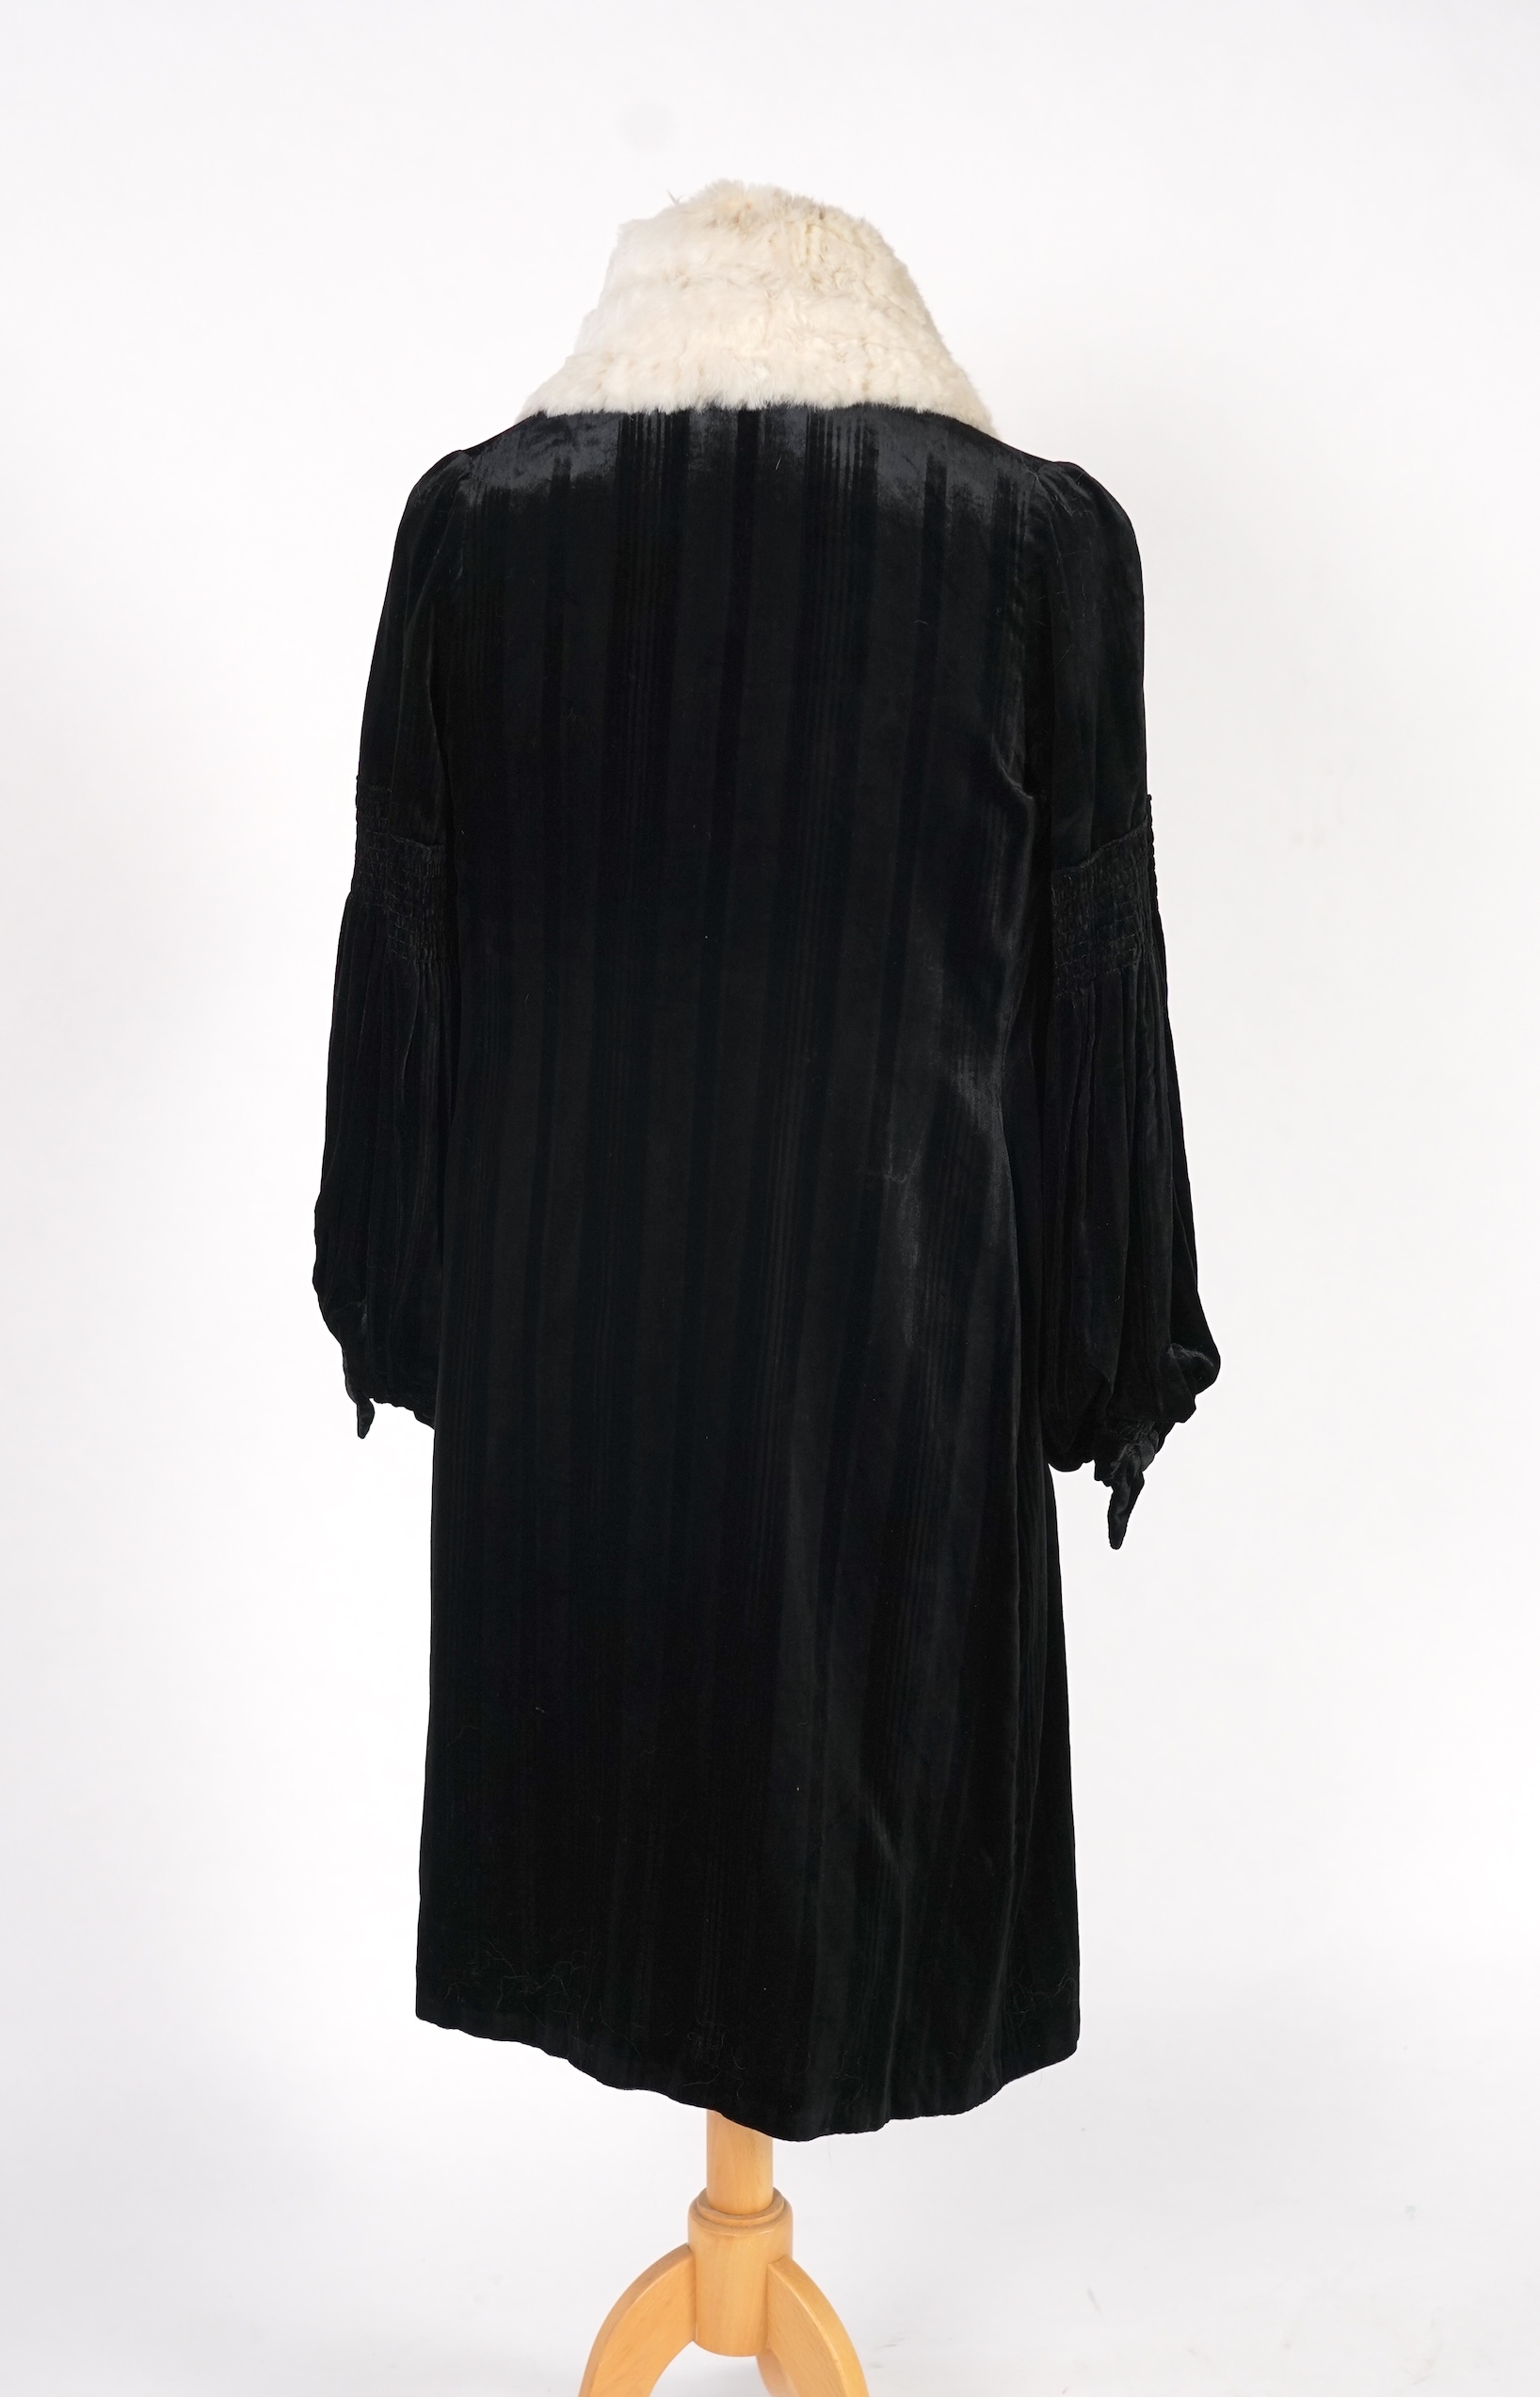 A 1920's ladies black striped silk velvet opera coat with a wide white fur collar and cream satin lining.